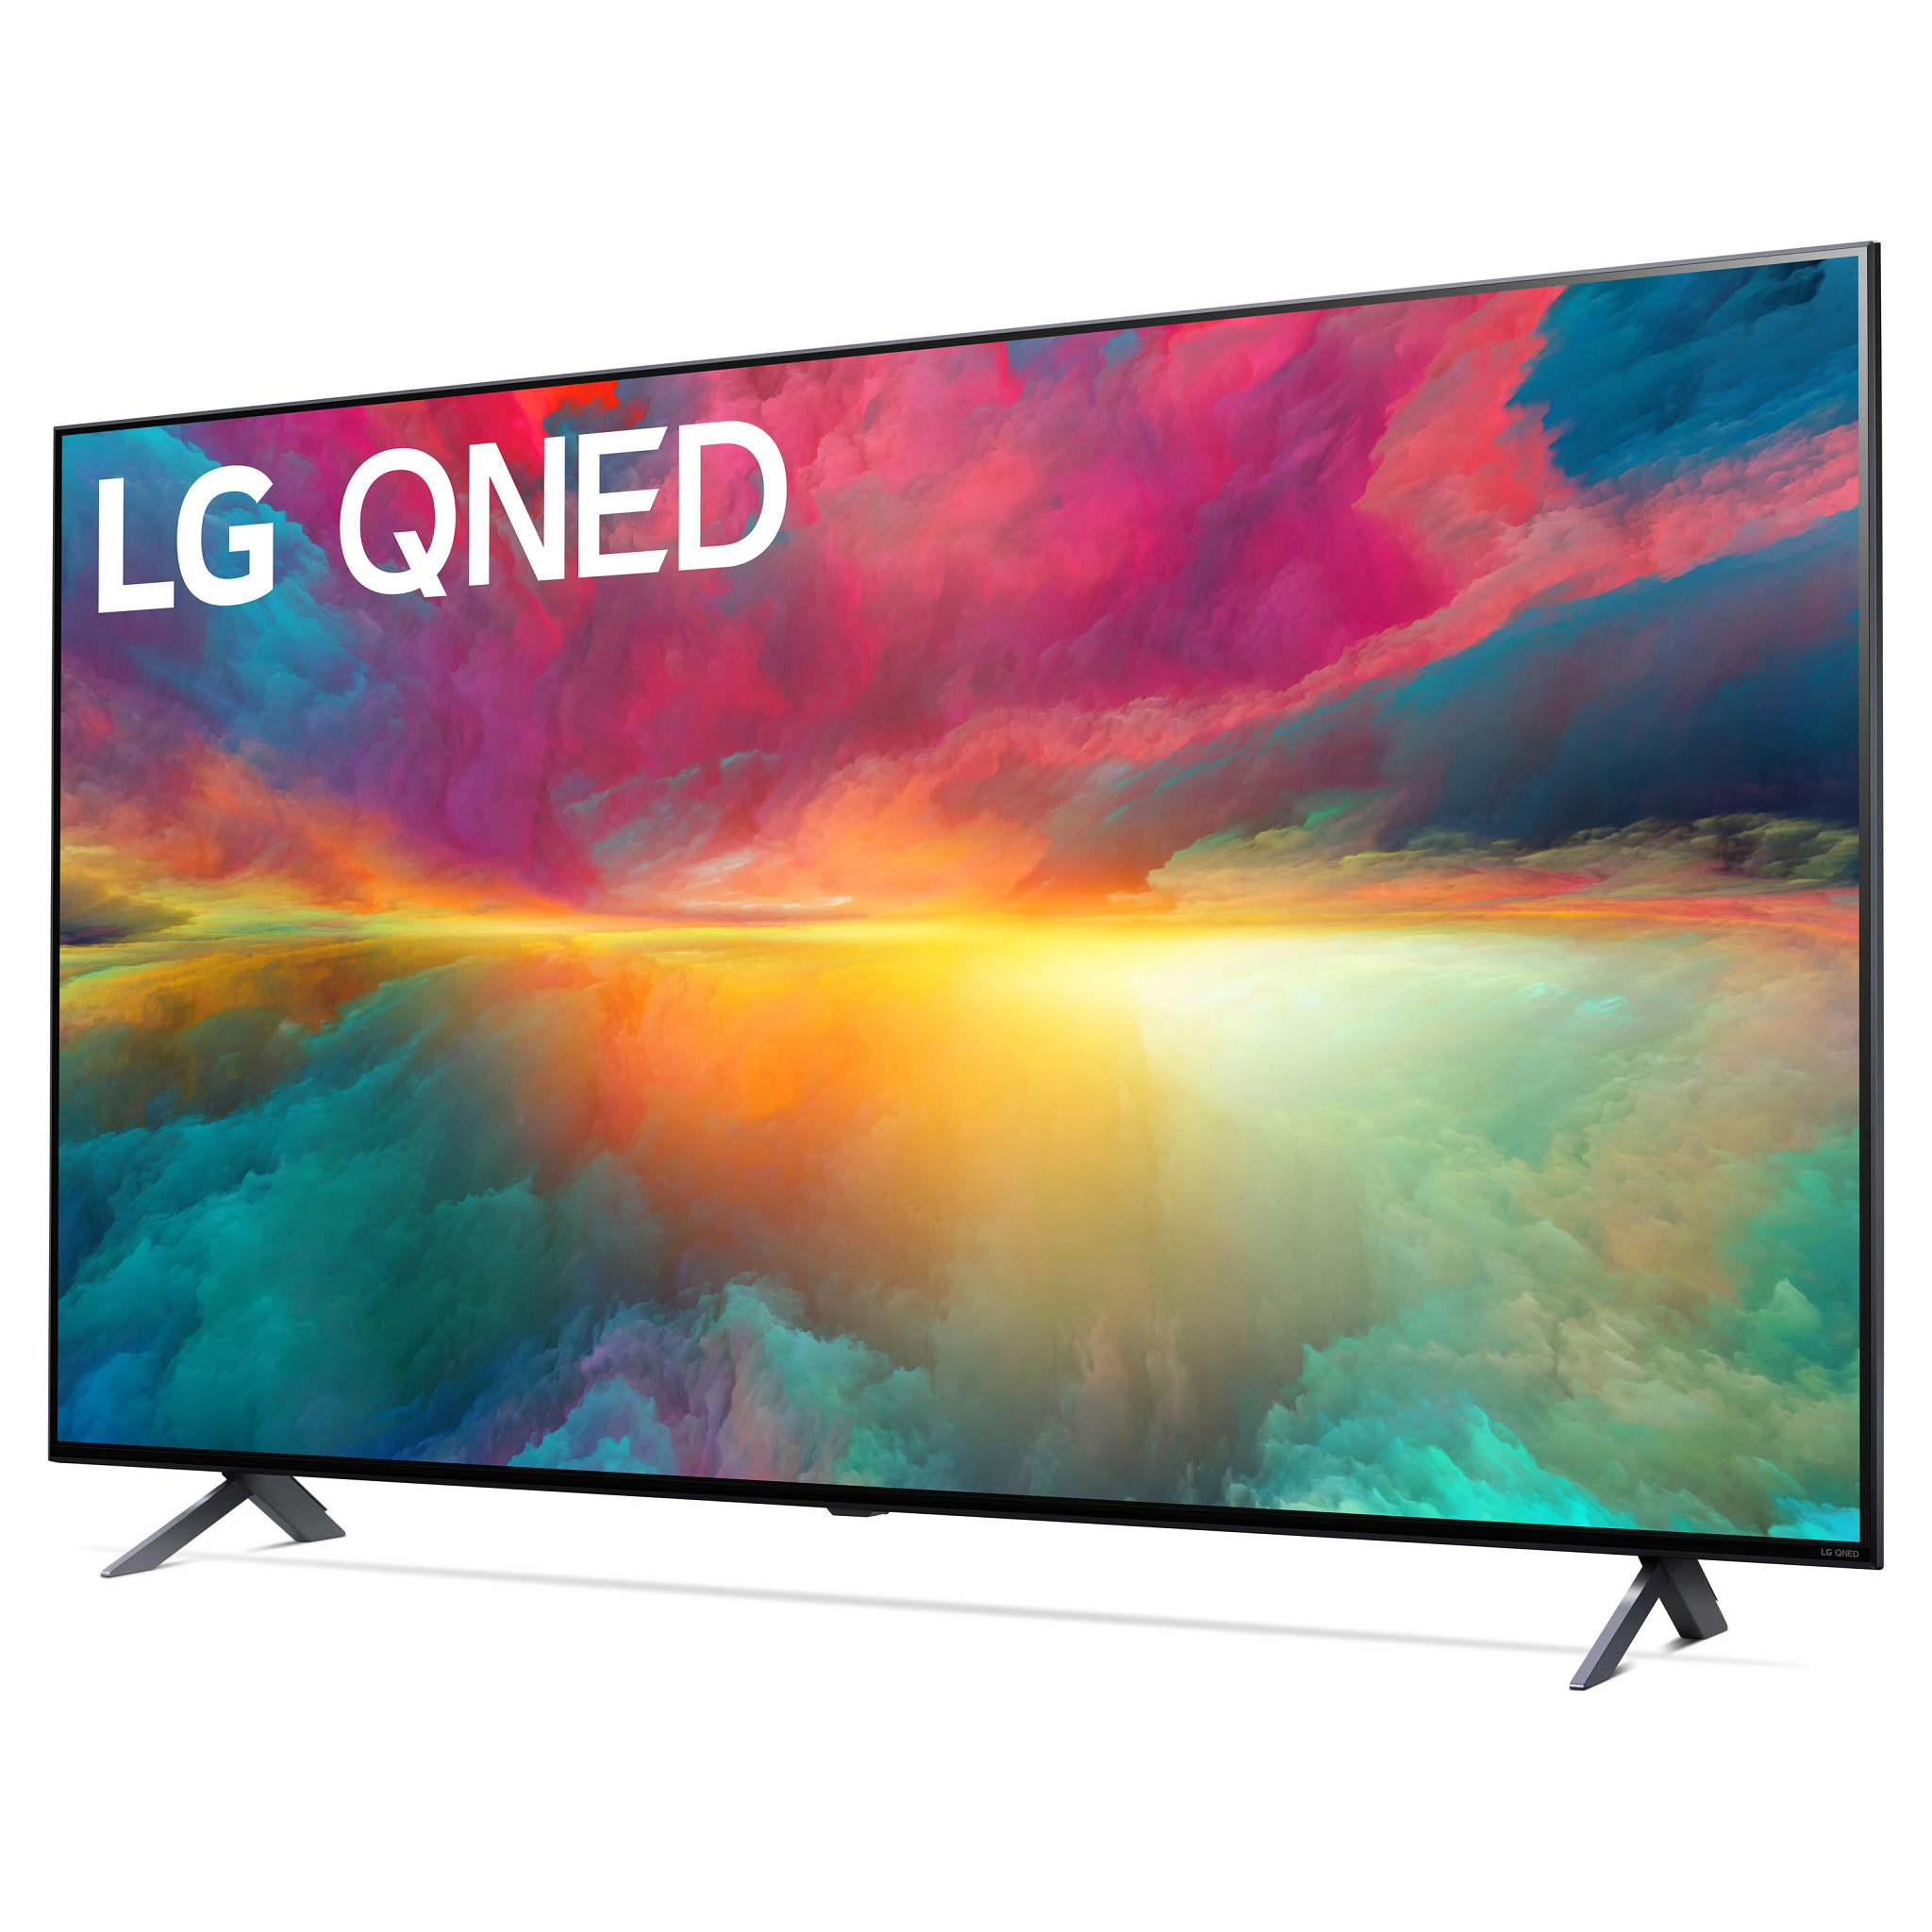 LG 55" Class 4K UHD QNED Web OS Smart TV with HDR 75 Series (55QNED75URA) - image 2 of 7